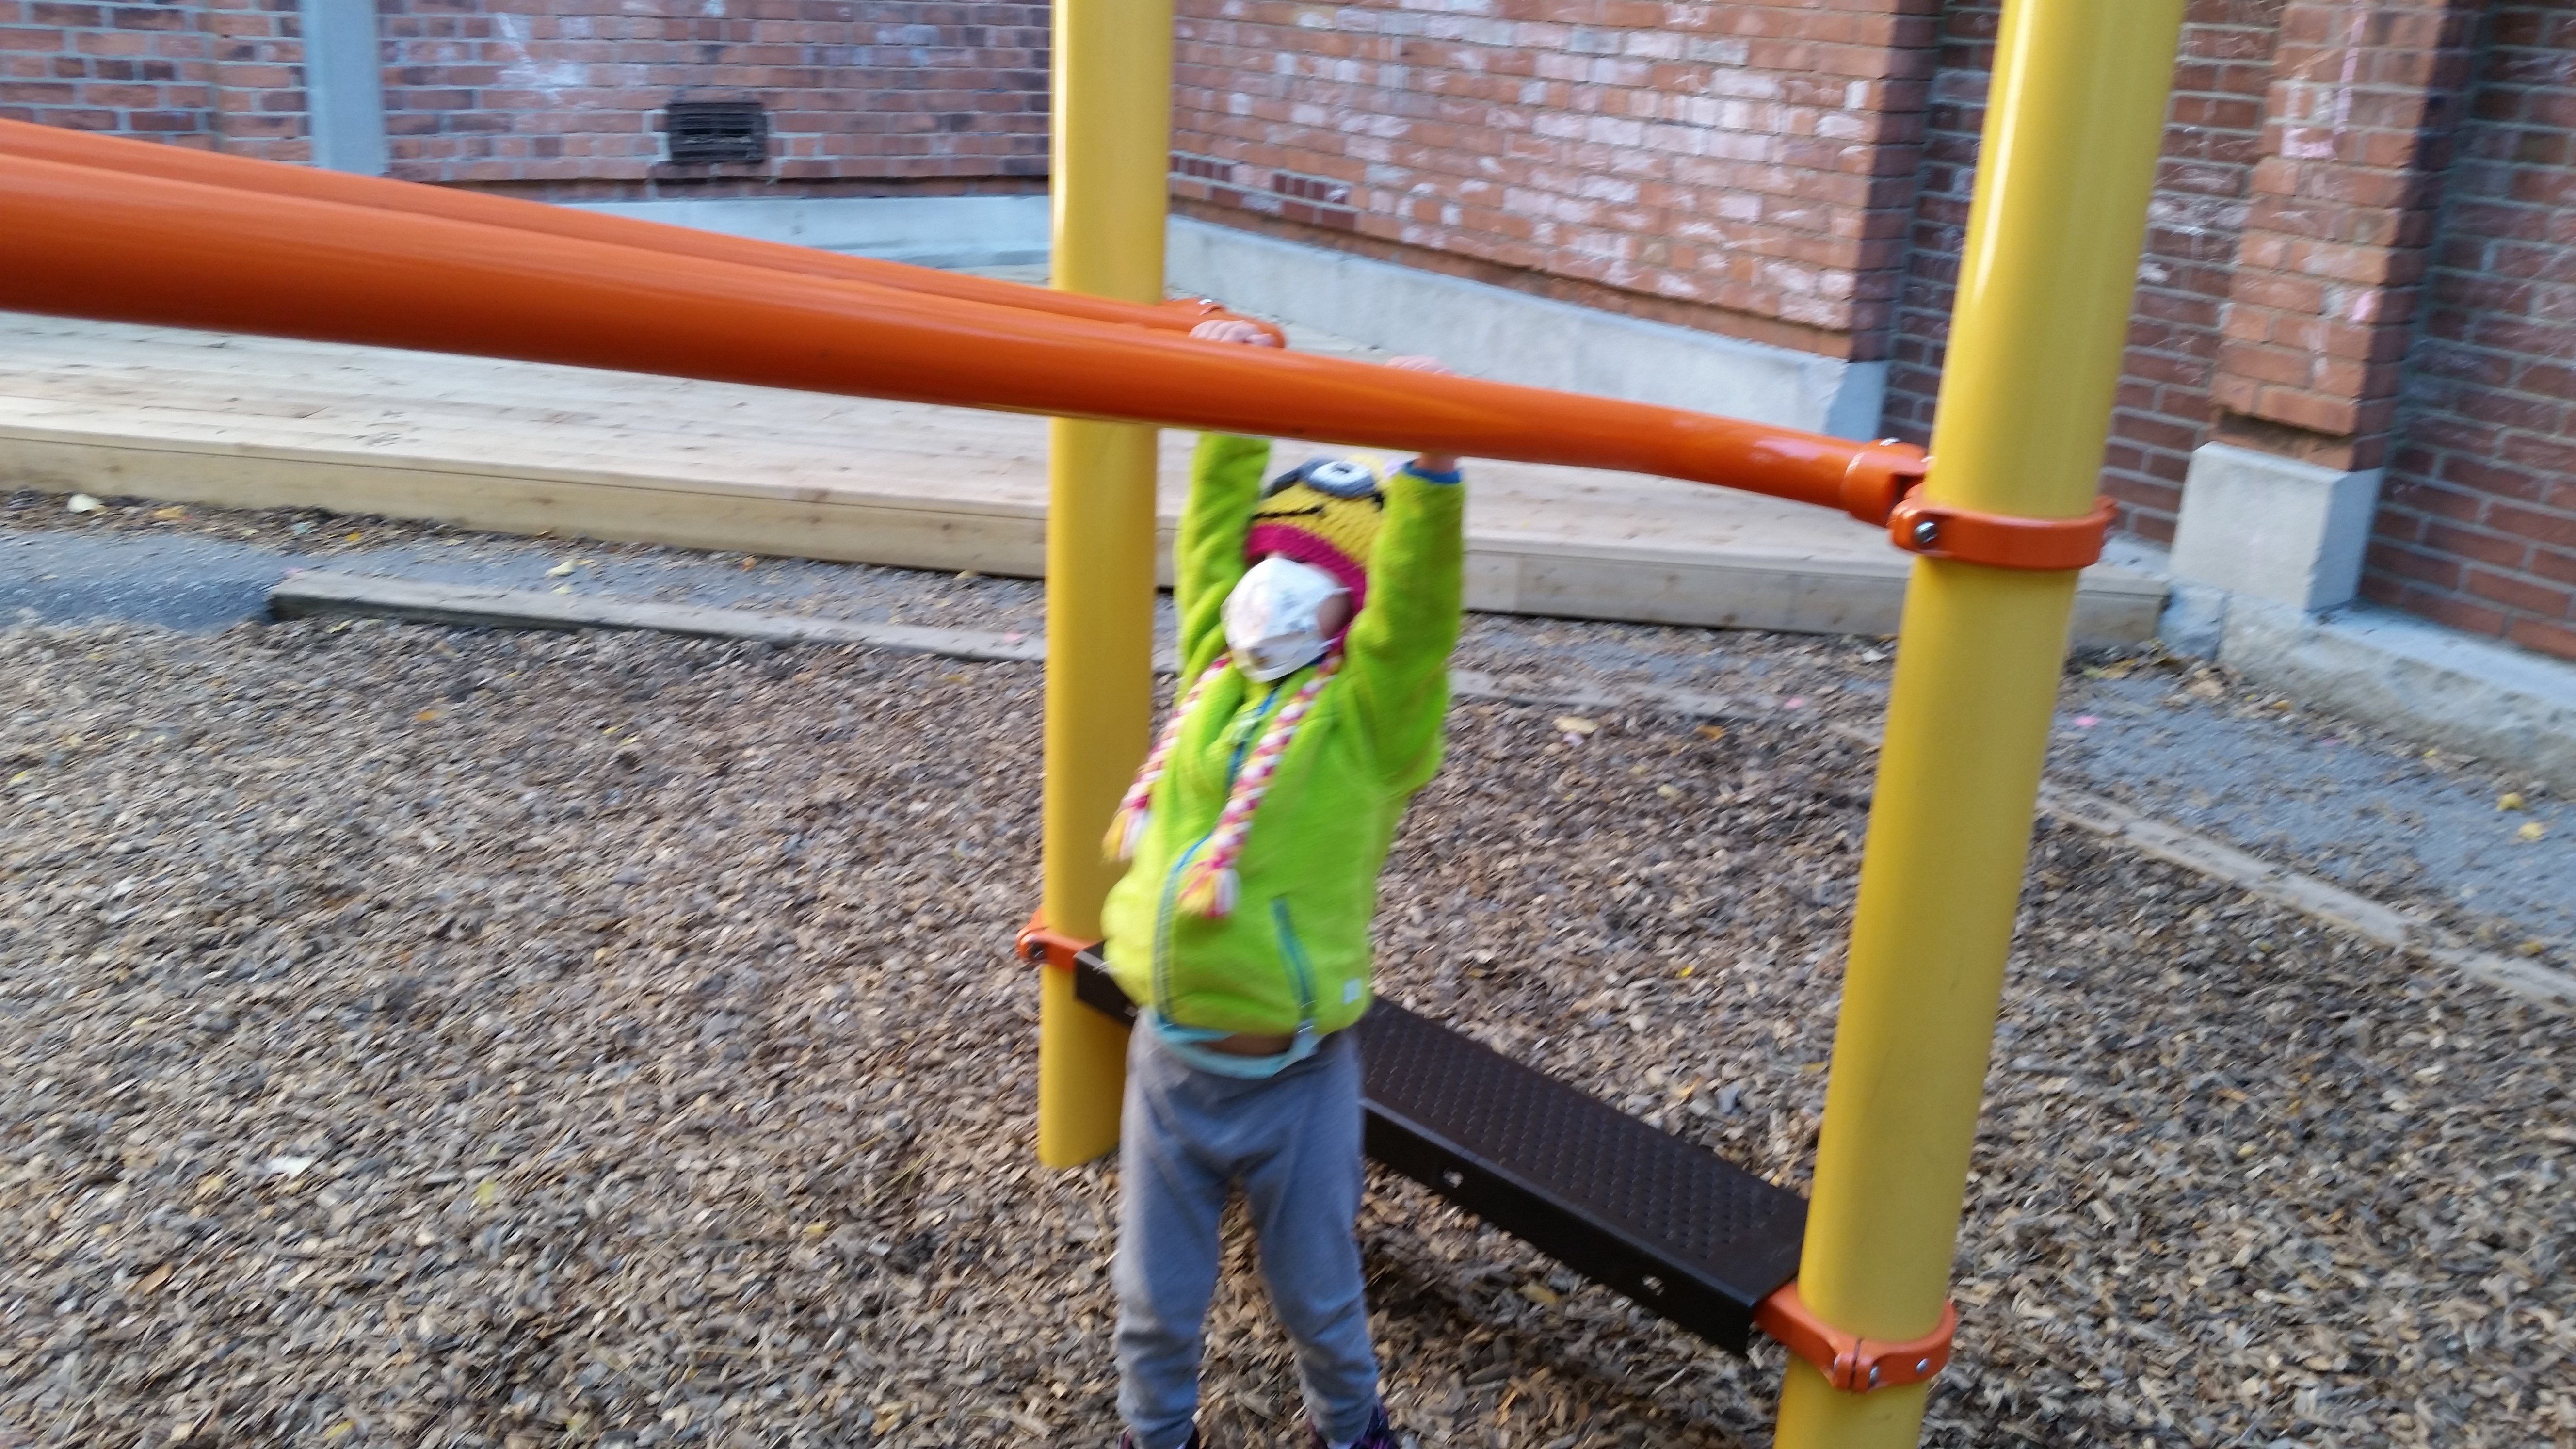 Sam on the monkey bars on the playground equipment at the school across from RMH